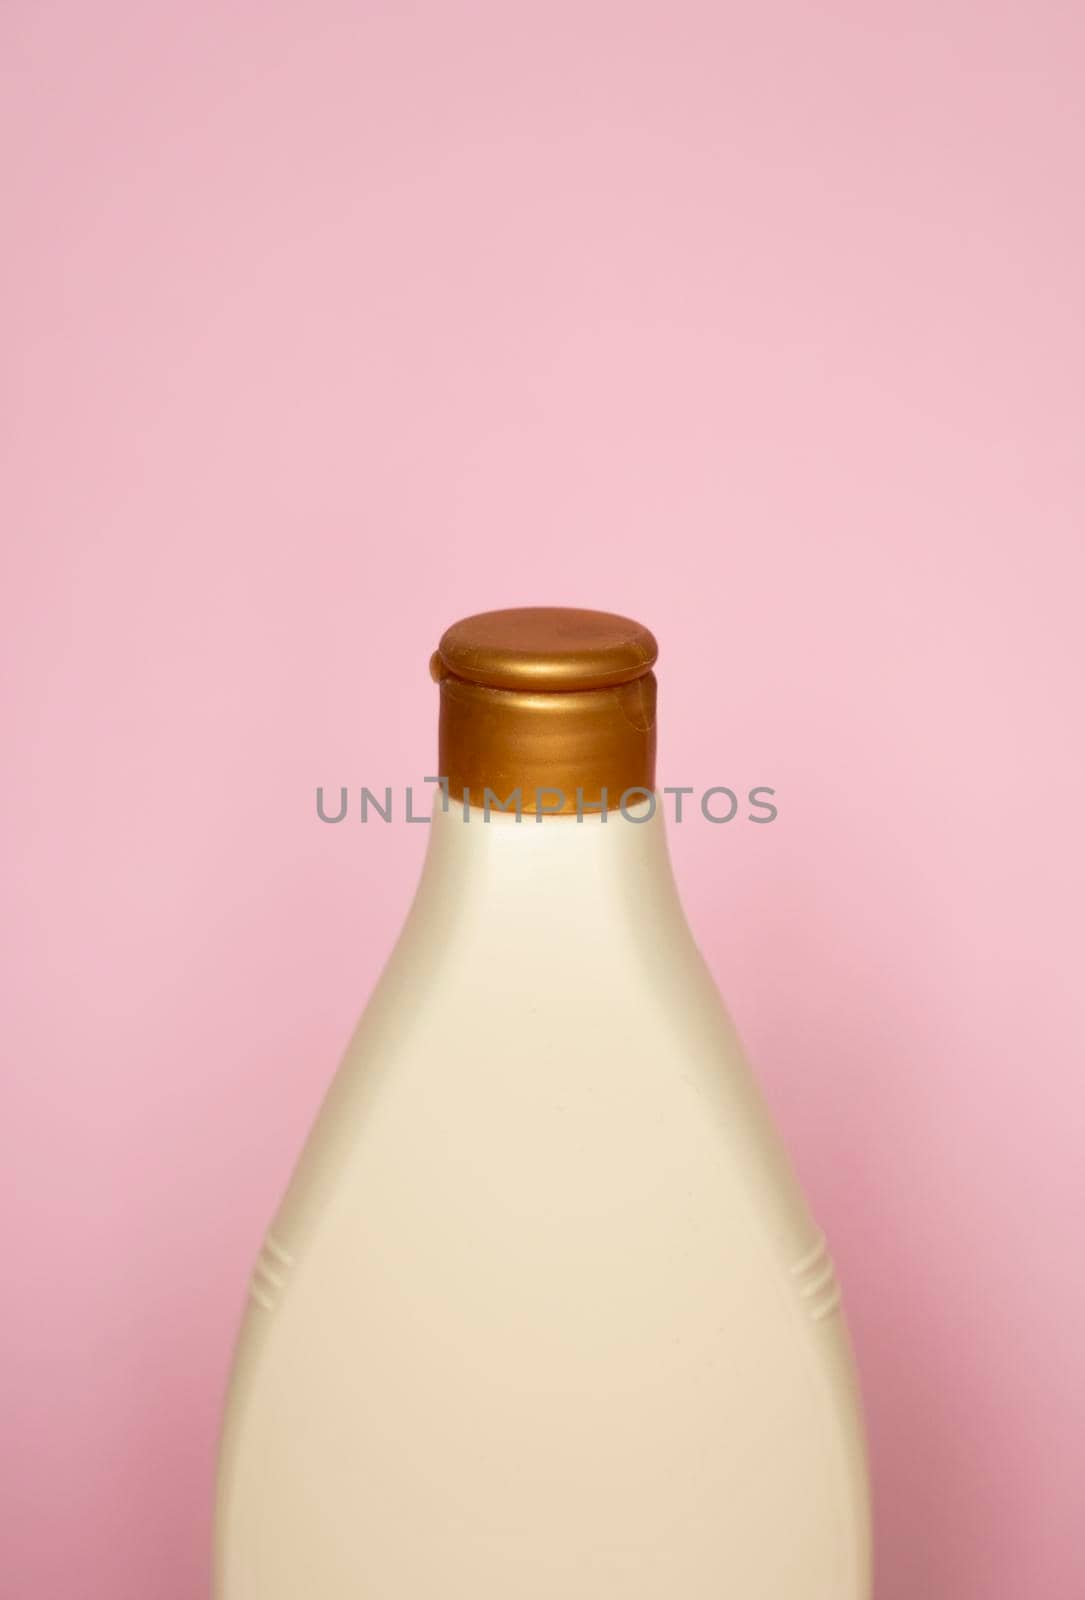 Beige plastic soap or shampoo bottle isolated on pink background. Skin care lotion. Bathing essential product. Shampoo bottle. Bath and body lotion. Fine liquid hand wash. Bathroom accessories